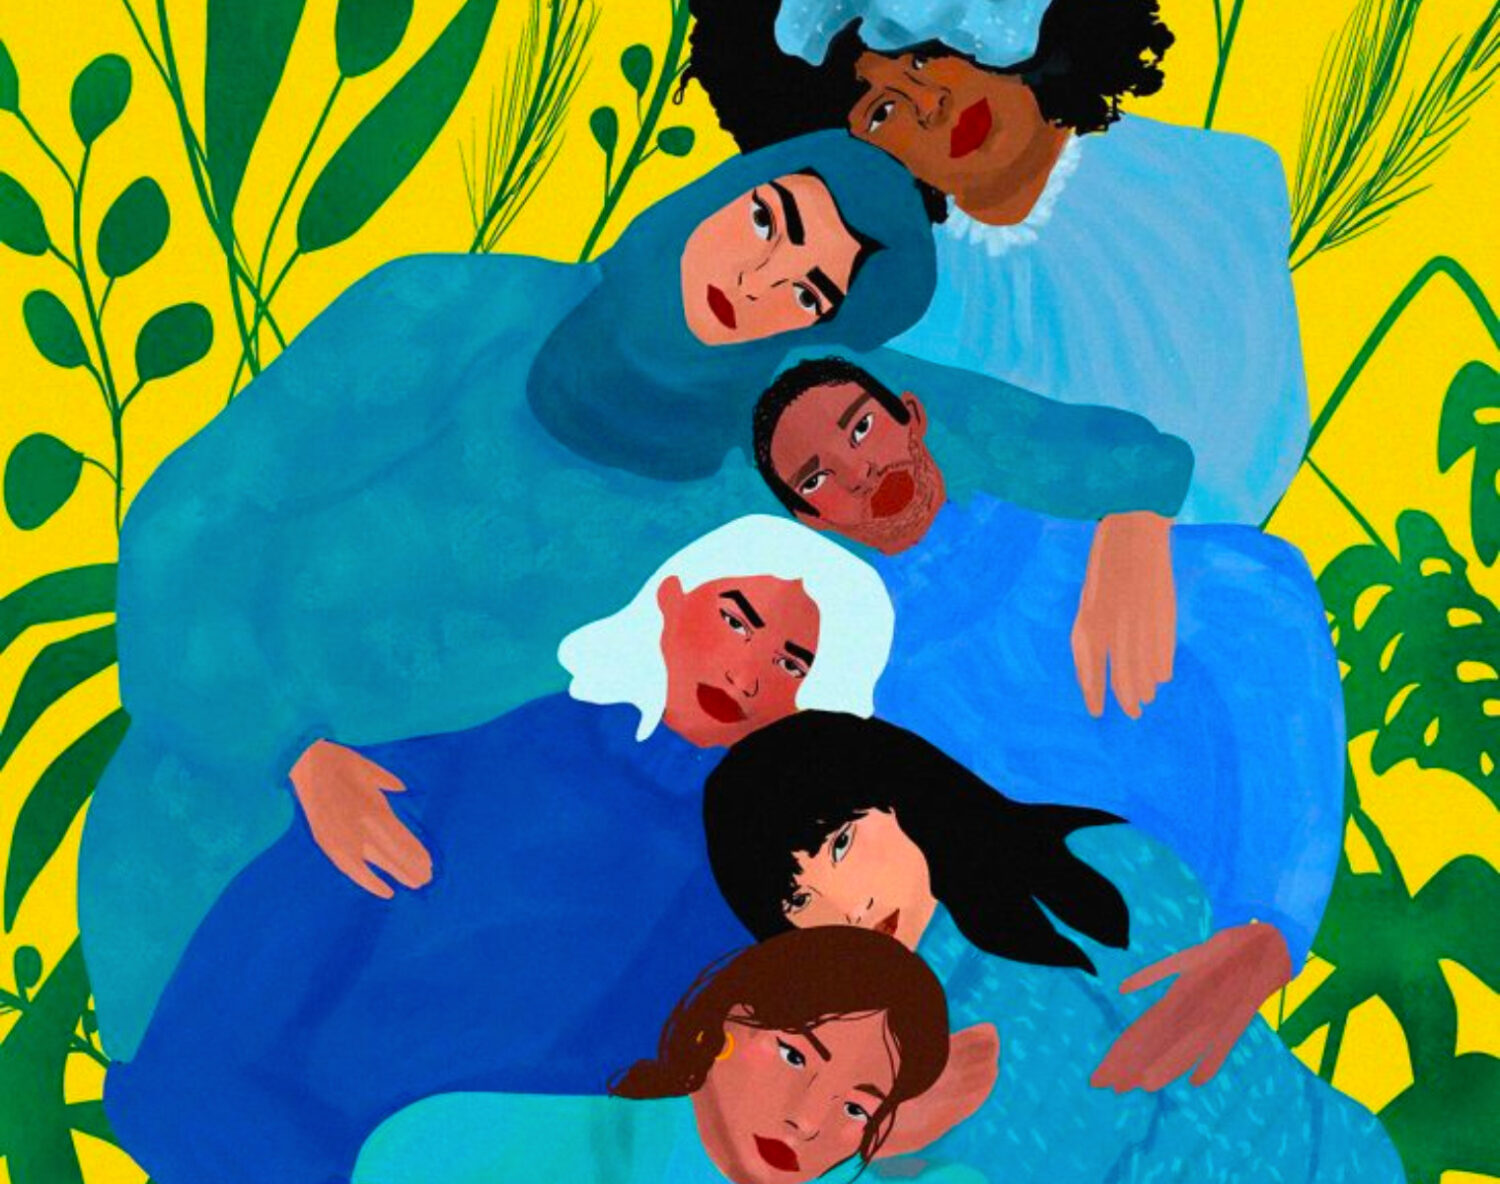 On top of a vibrant yellow background with green plants overlaid, four people of varying races and genders lay hugging each other. All are wearing blue toned clothes and looking straight on at the viewer. The style is illustration.